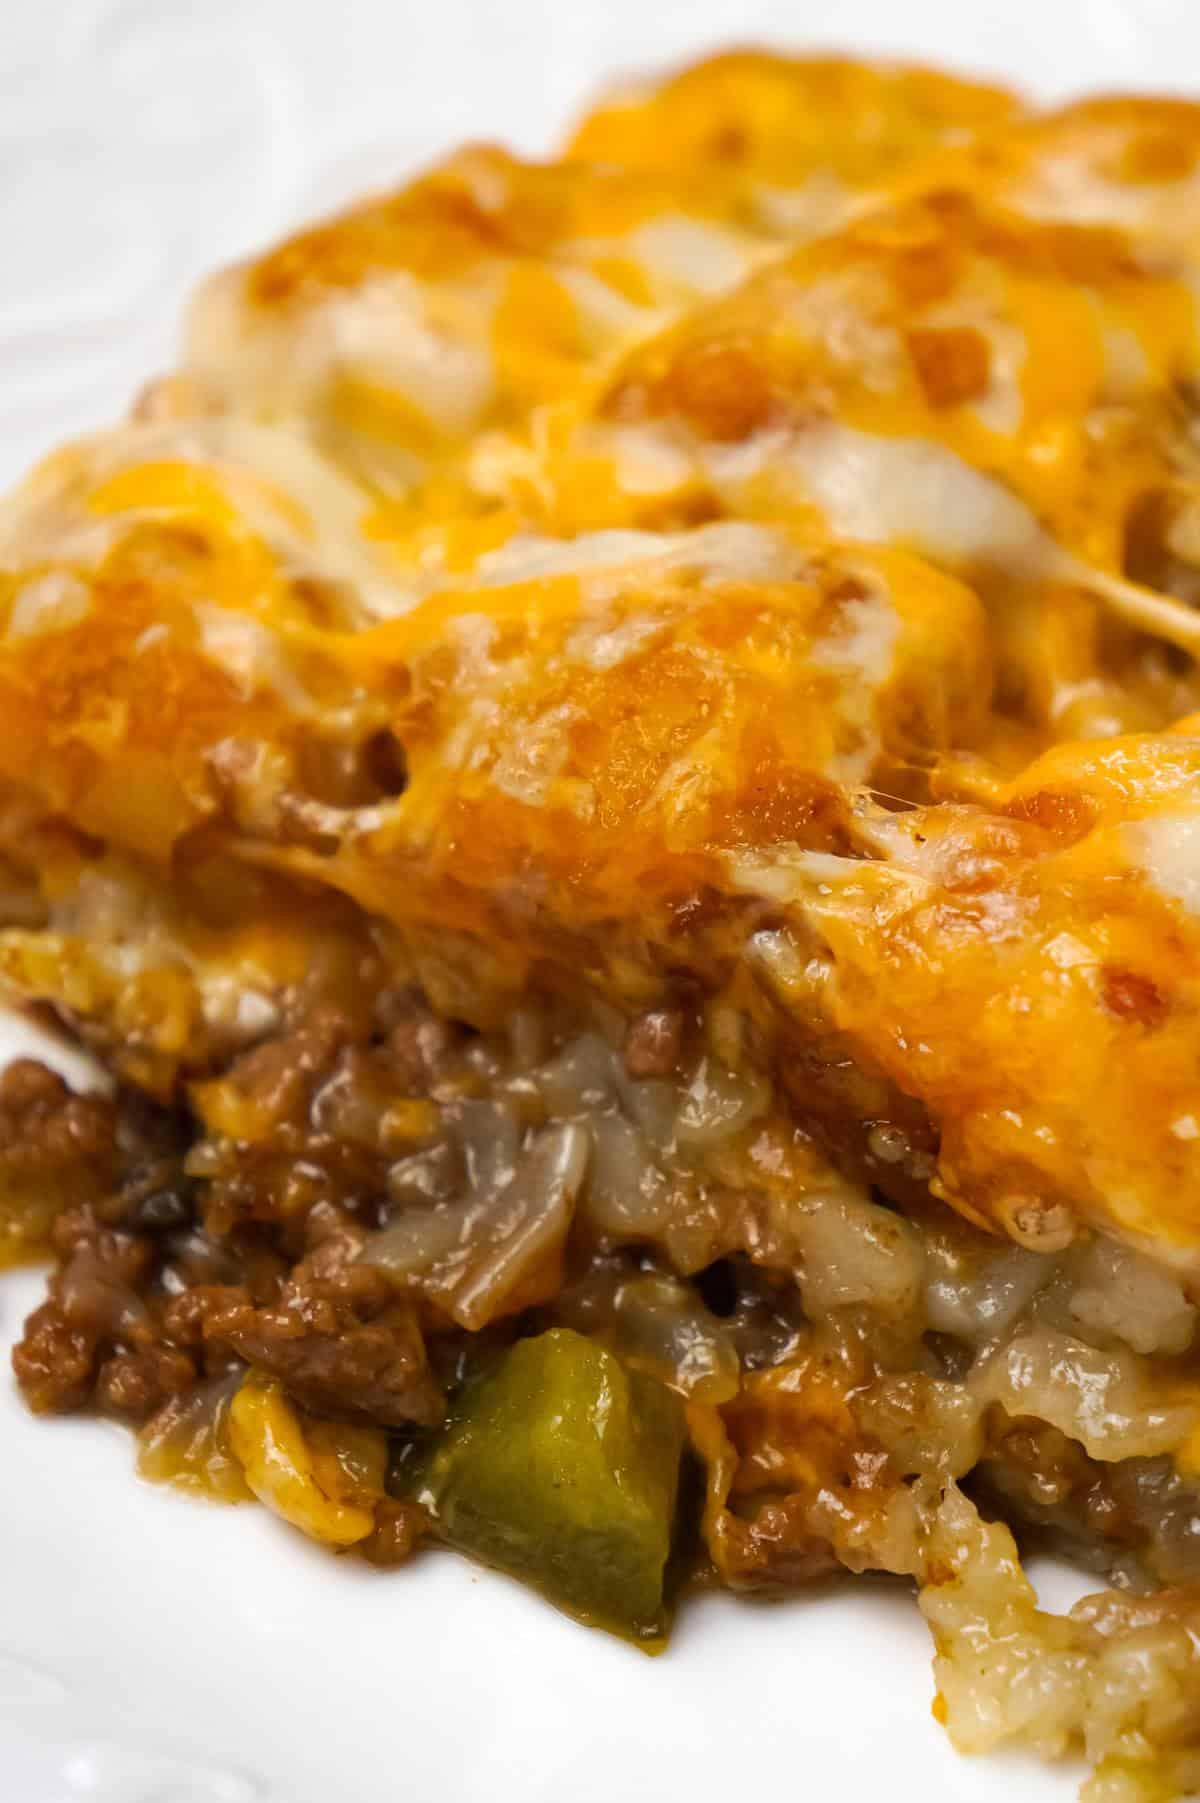 Philly Cheese Steak Tater Tot Casserole - This is Not Diet Food Philly Cheesesteak Casserole With Tater Tots